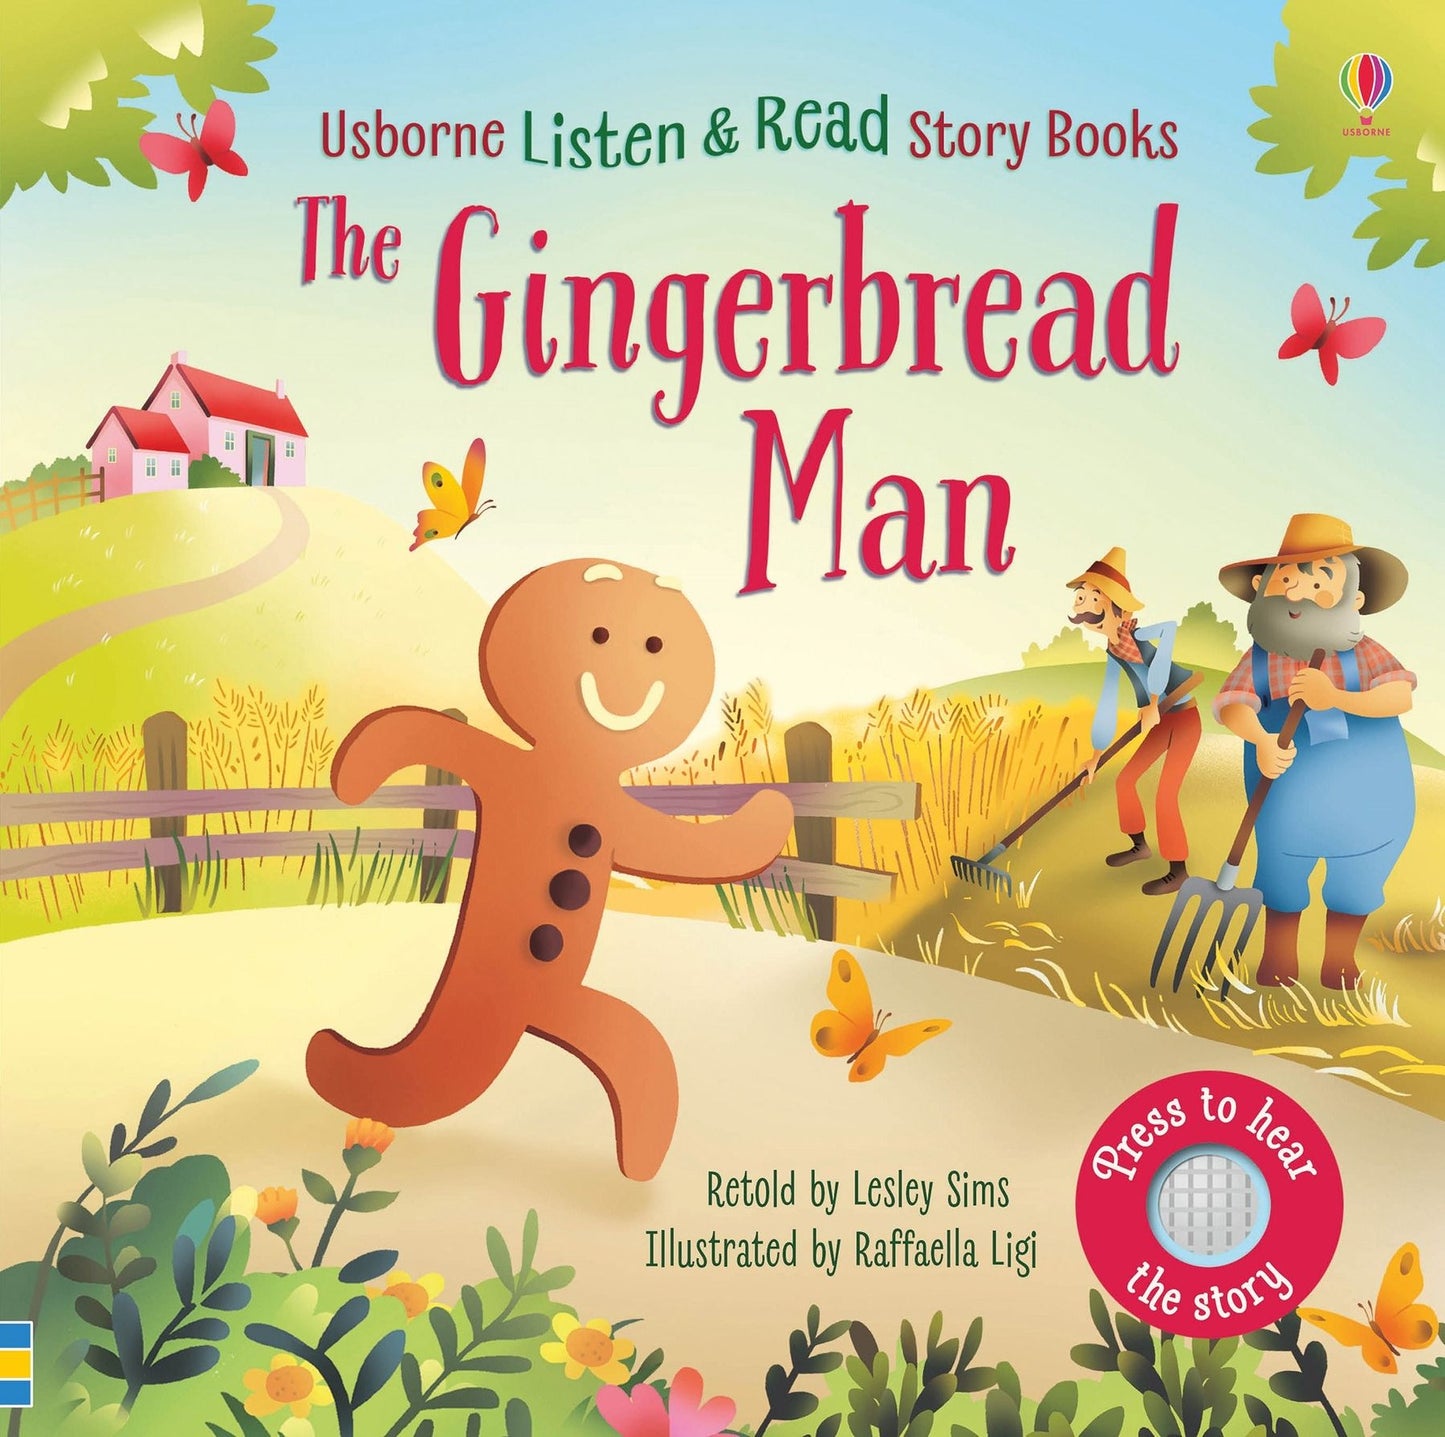 Listen and Read - The Gingerbread Man